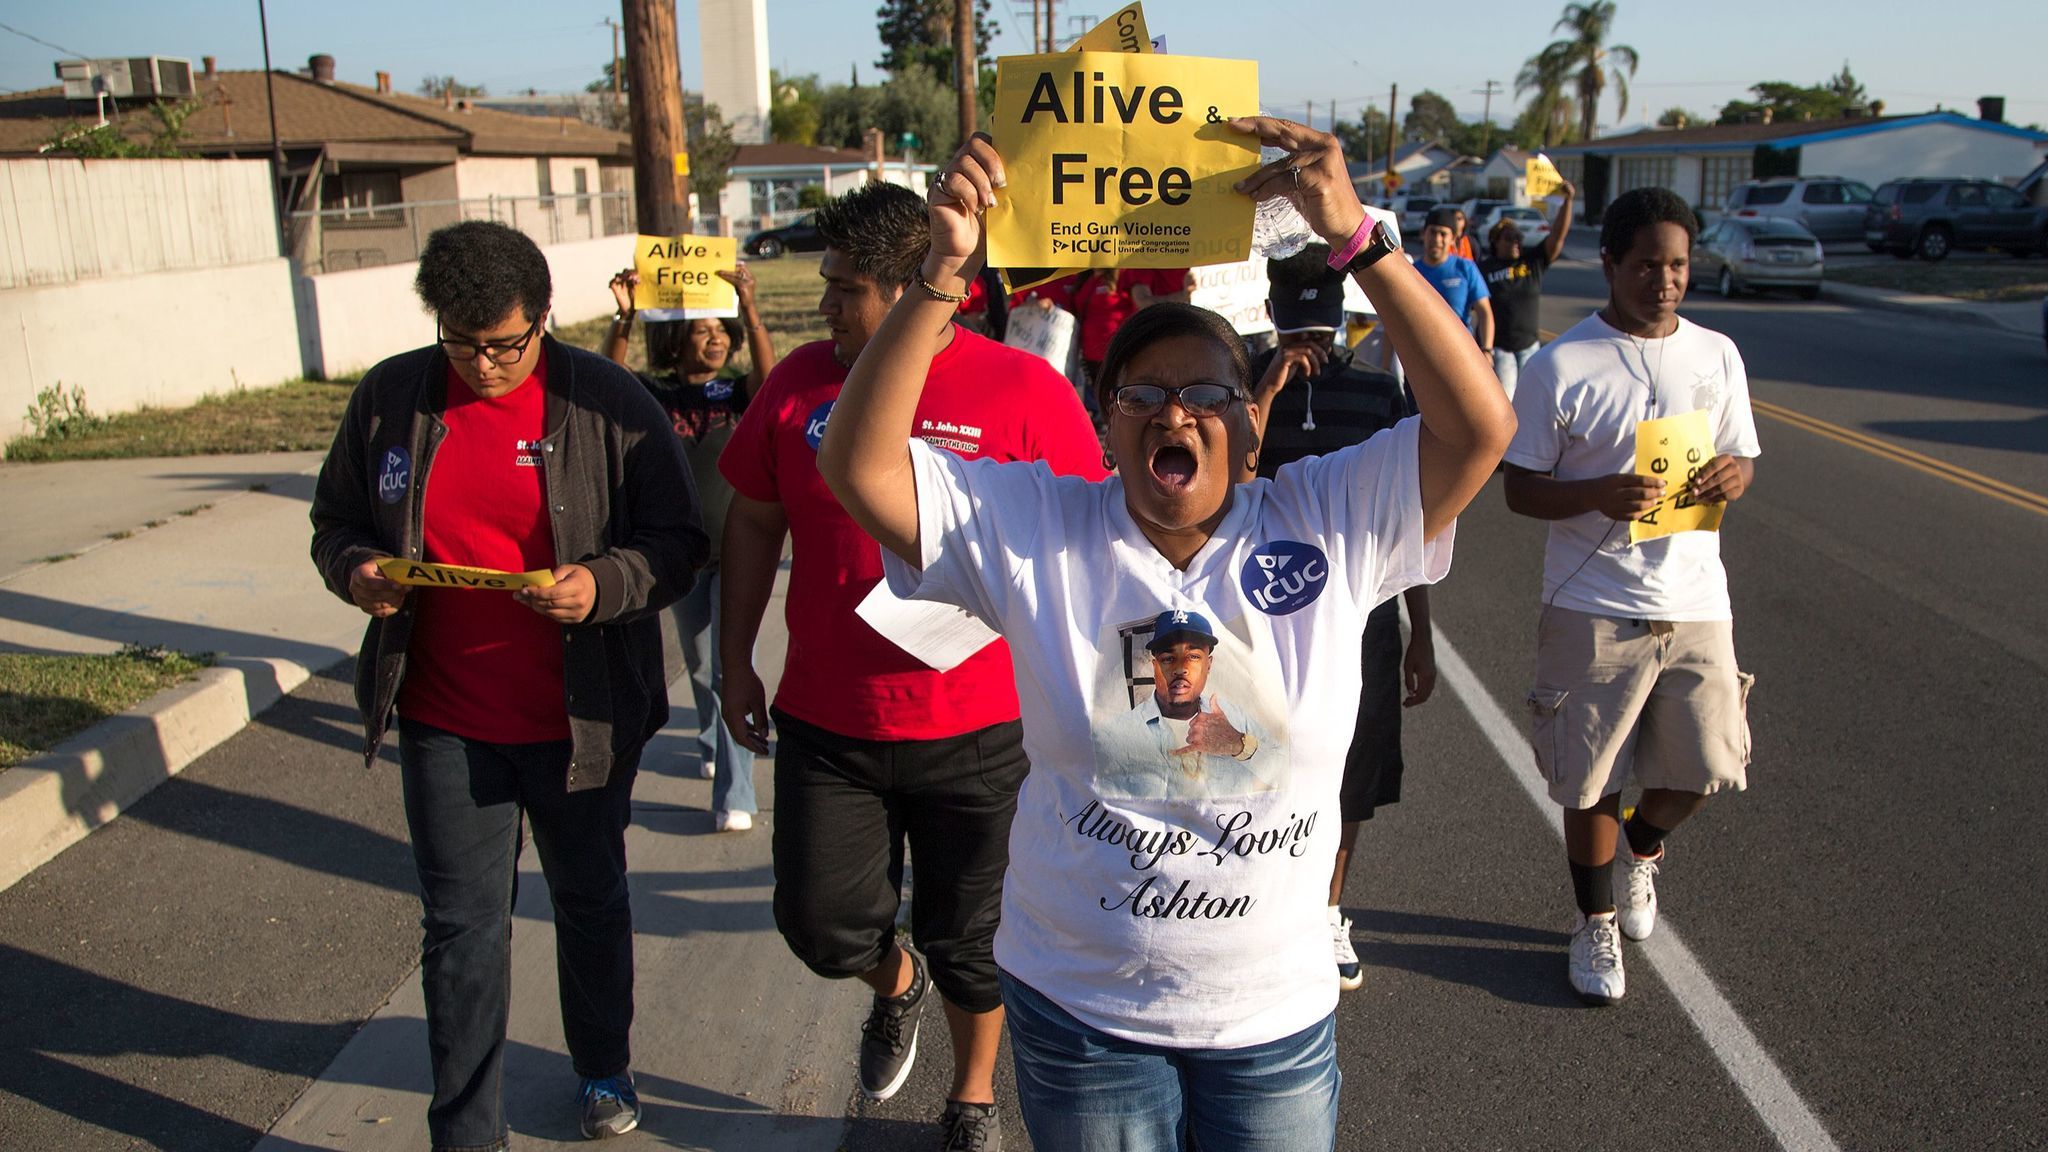 Sandra Hall of San Bernardino marches with about 200 community members in a Peace Walk to honor the victims of homicides and call for an end to gun violence on May 19, 2016, in San Bernardino.